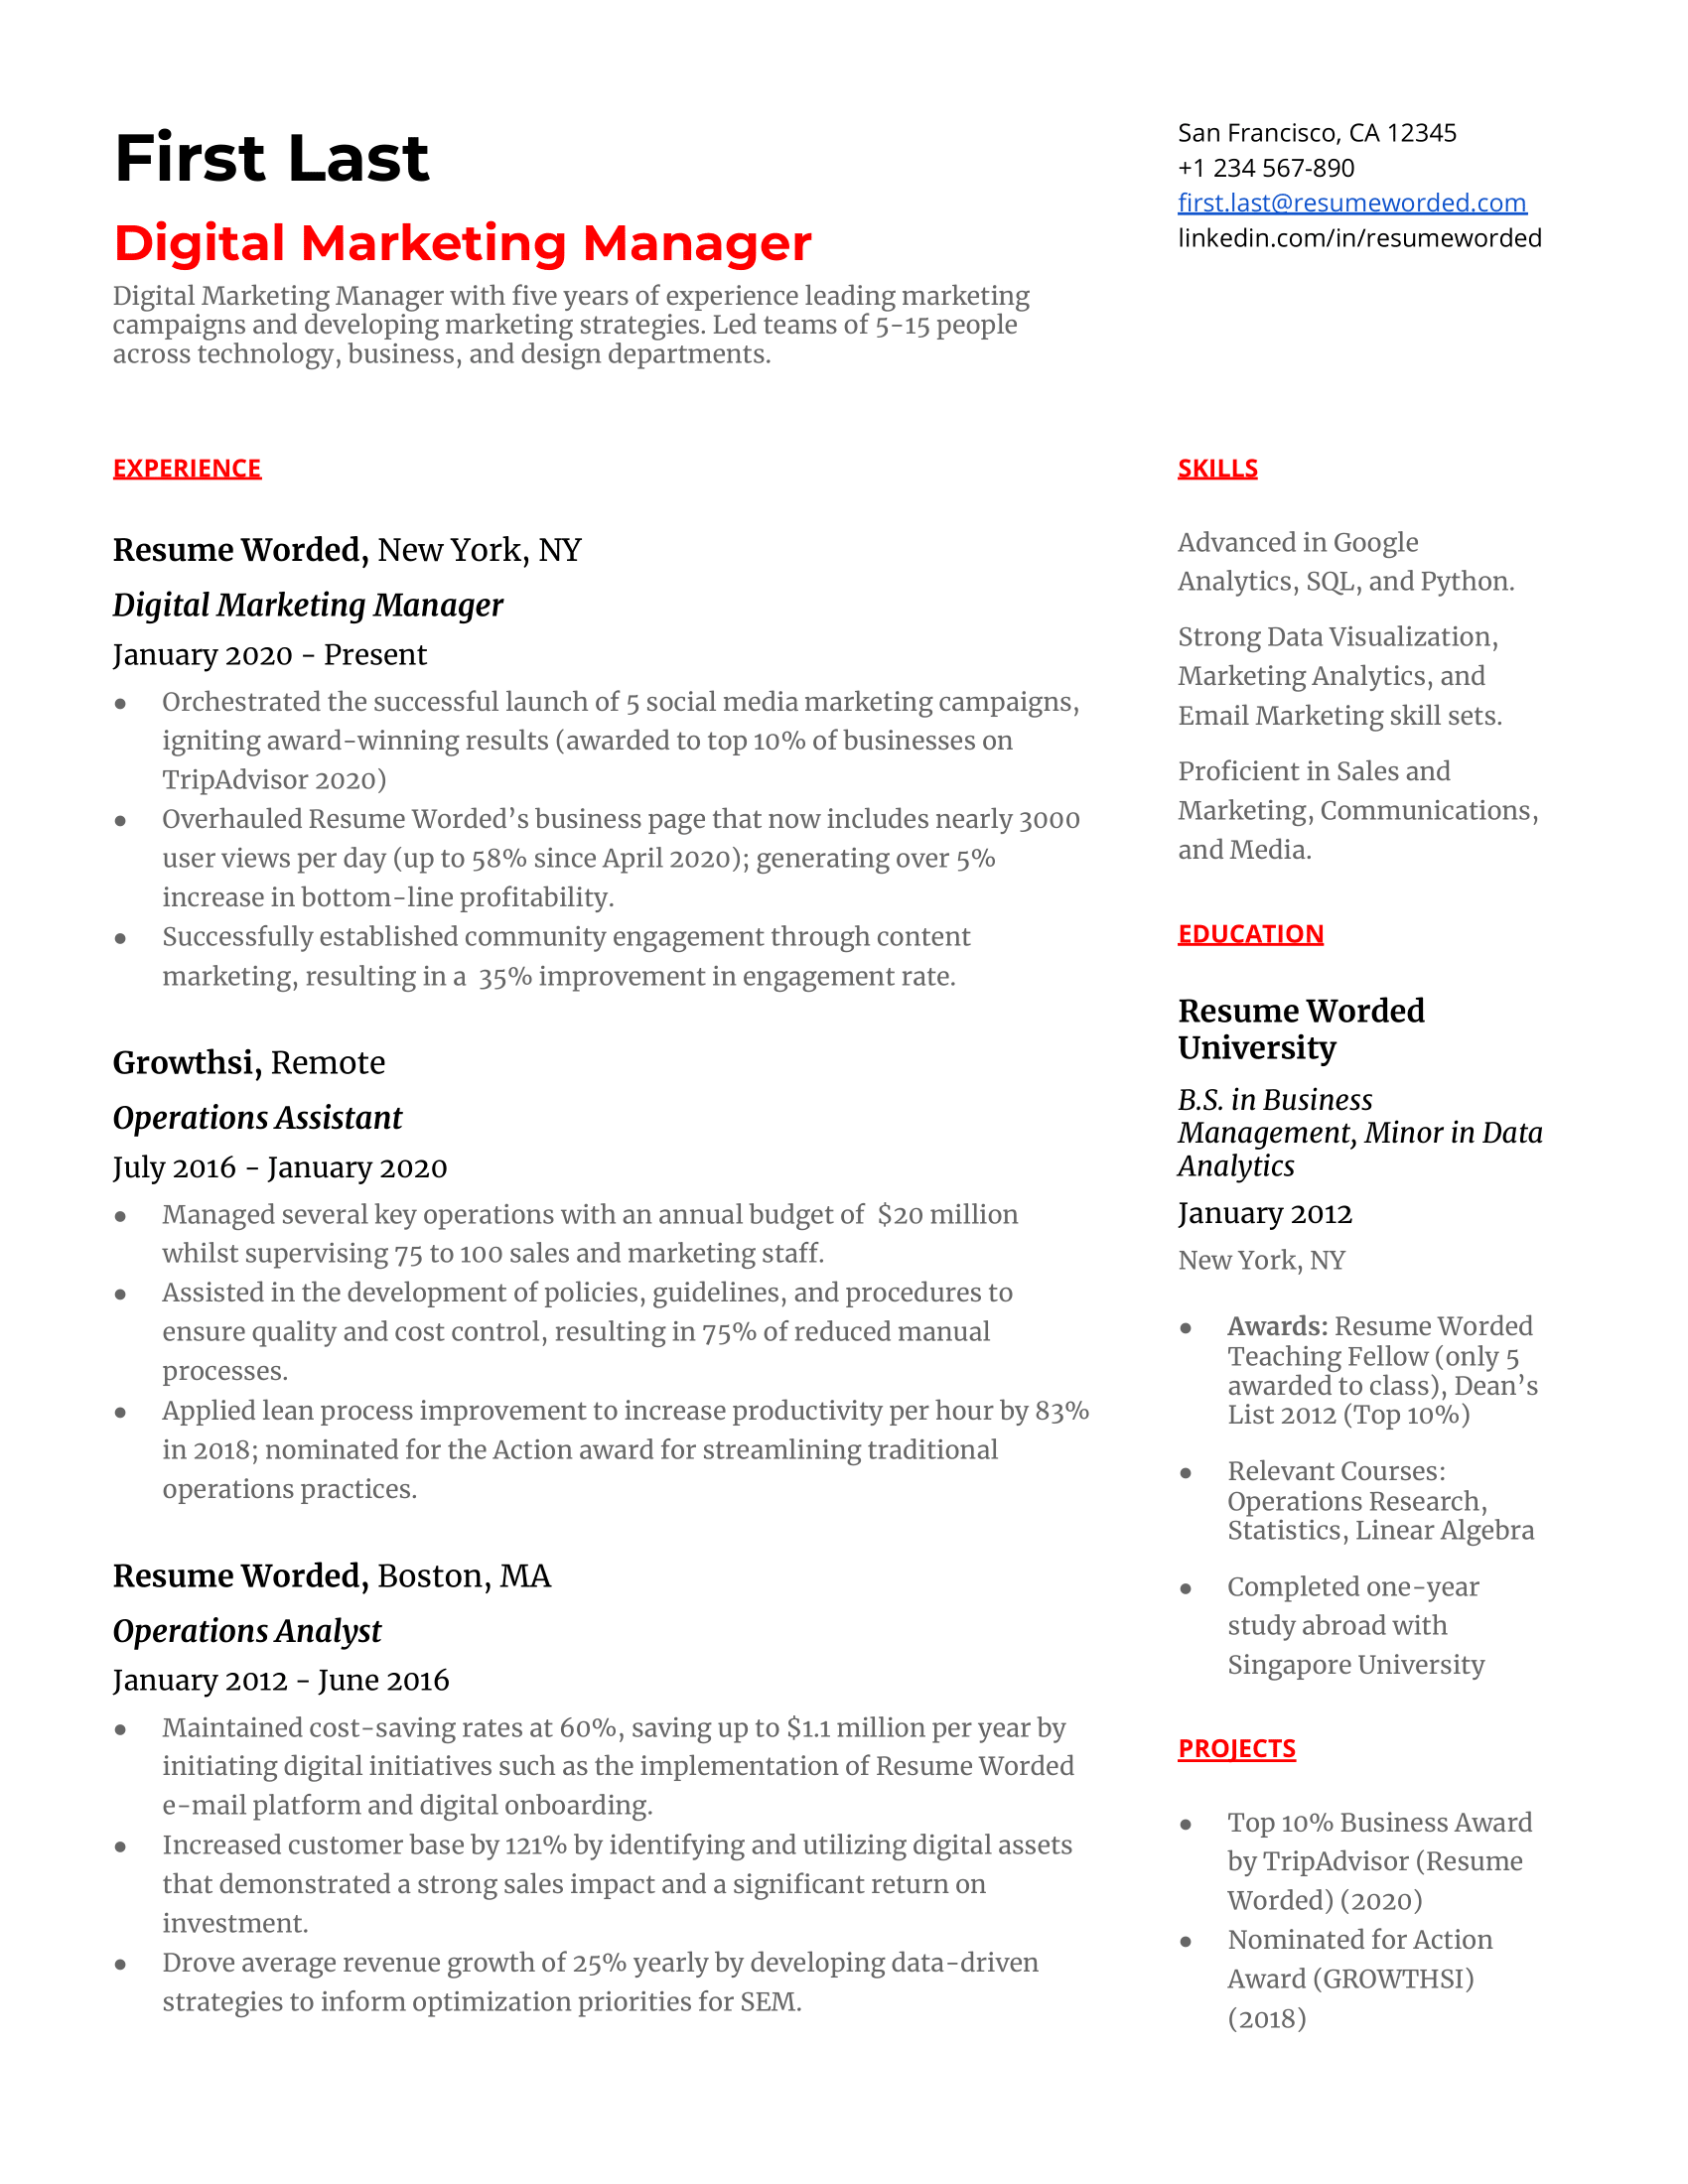 Digital marketing manager resume with hard technical skills, clear accomplishments, and strong verbs